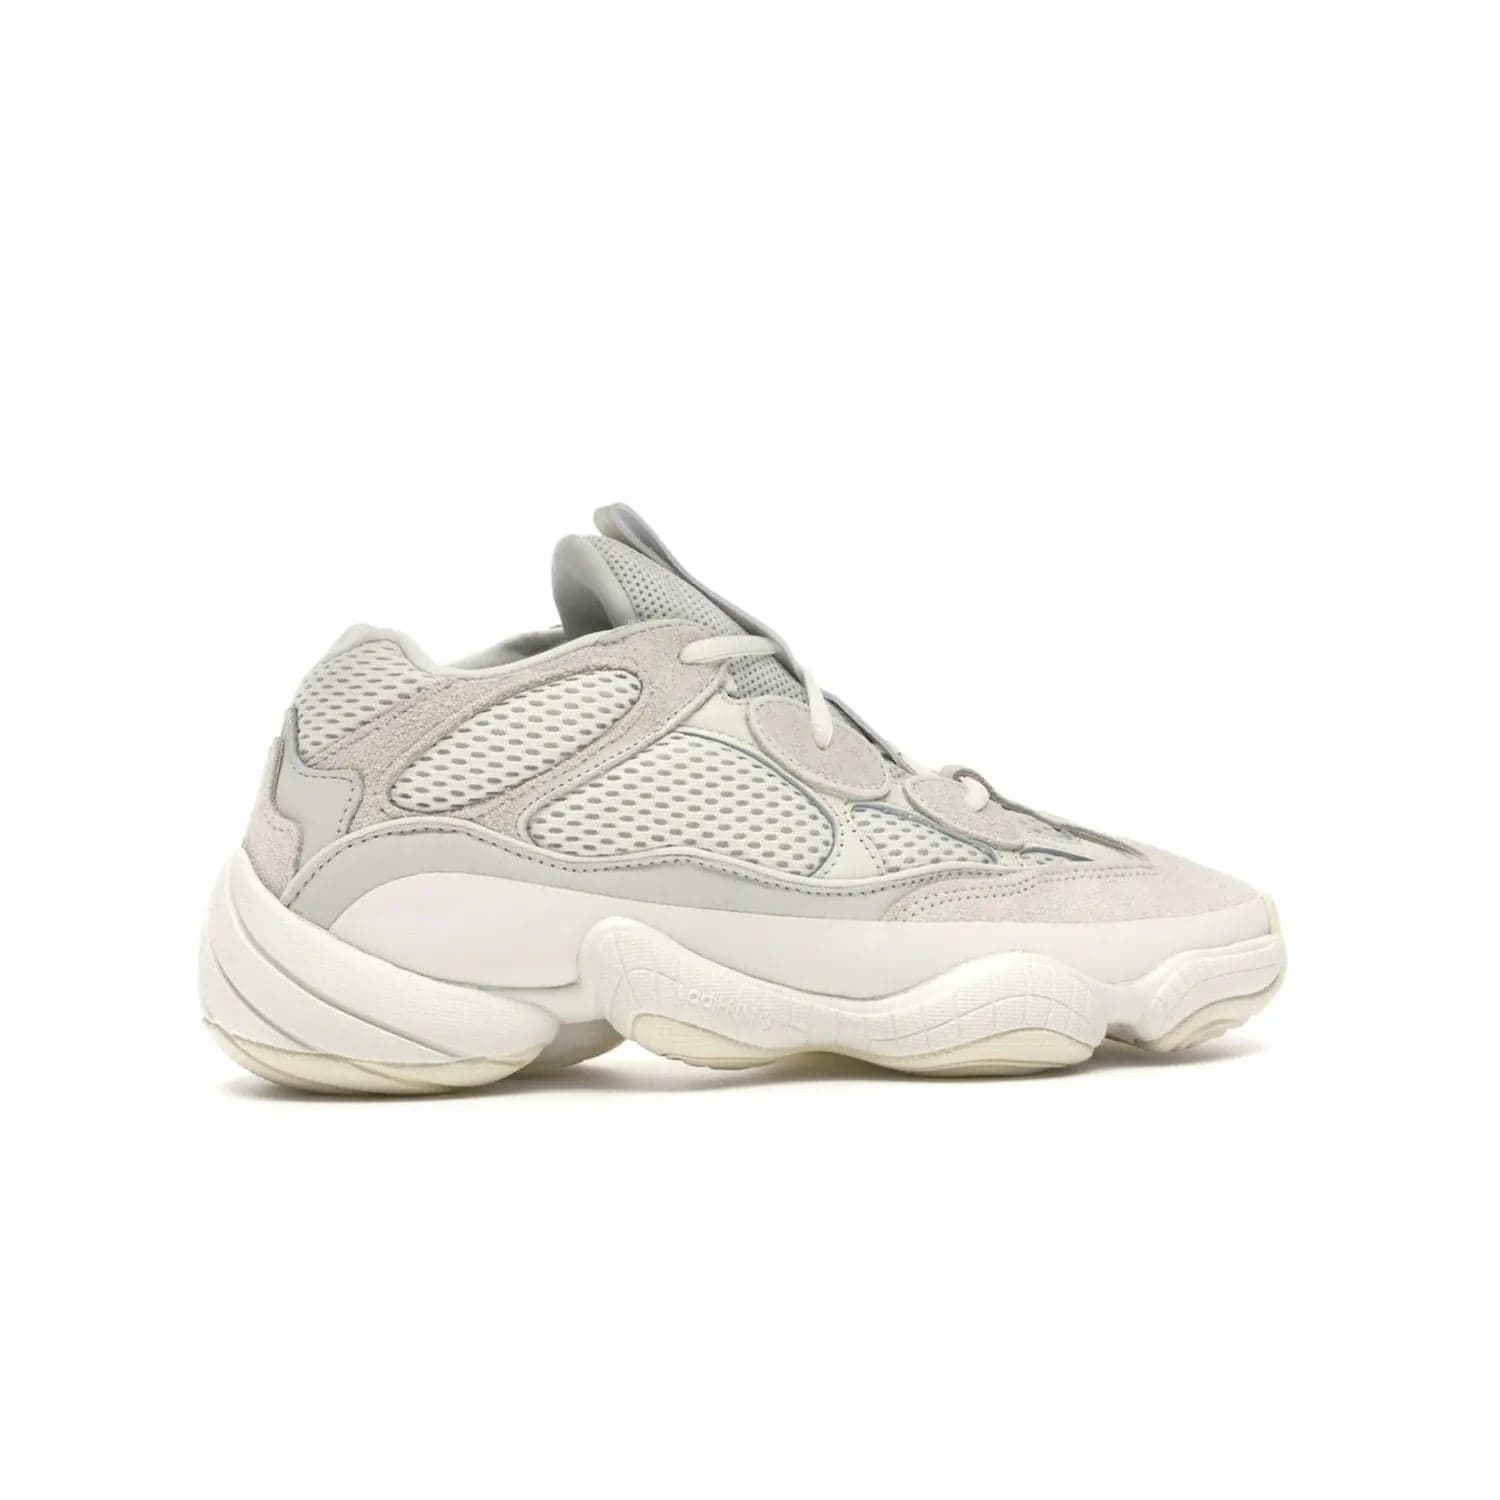 adidas Yeezy 500 Bone White - Image 35 - Only at www.BallersClubKickz.com - Classic look perfect for any sneaker collection. The adidas Yeezy 500 "Bone White" blends a white mesh upper with suede overlays & a chunky midsole inspired by the Adidas KB3. Complimented by a tonal-cream outsole, this timeless style is a must-have.